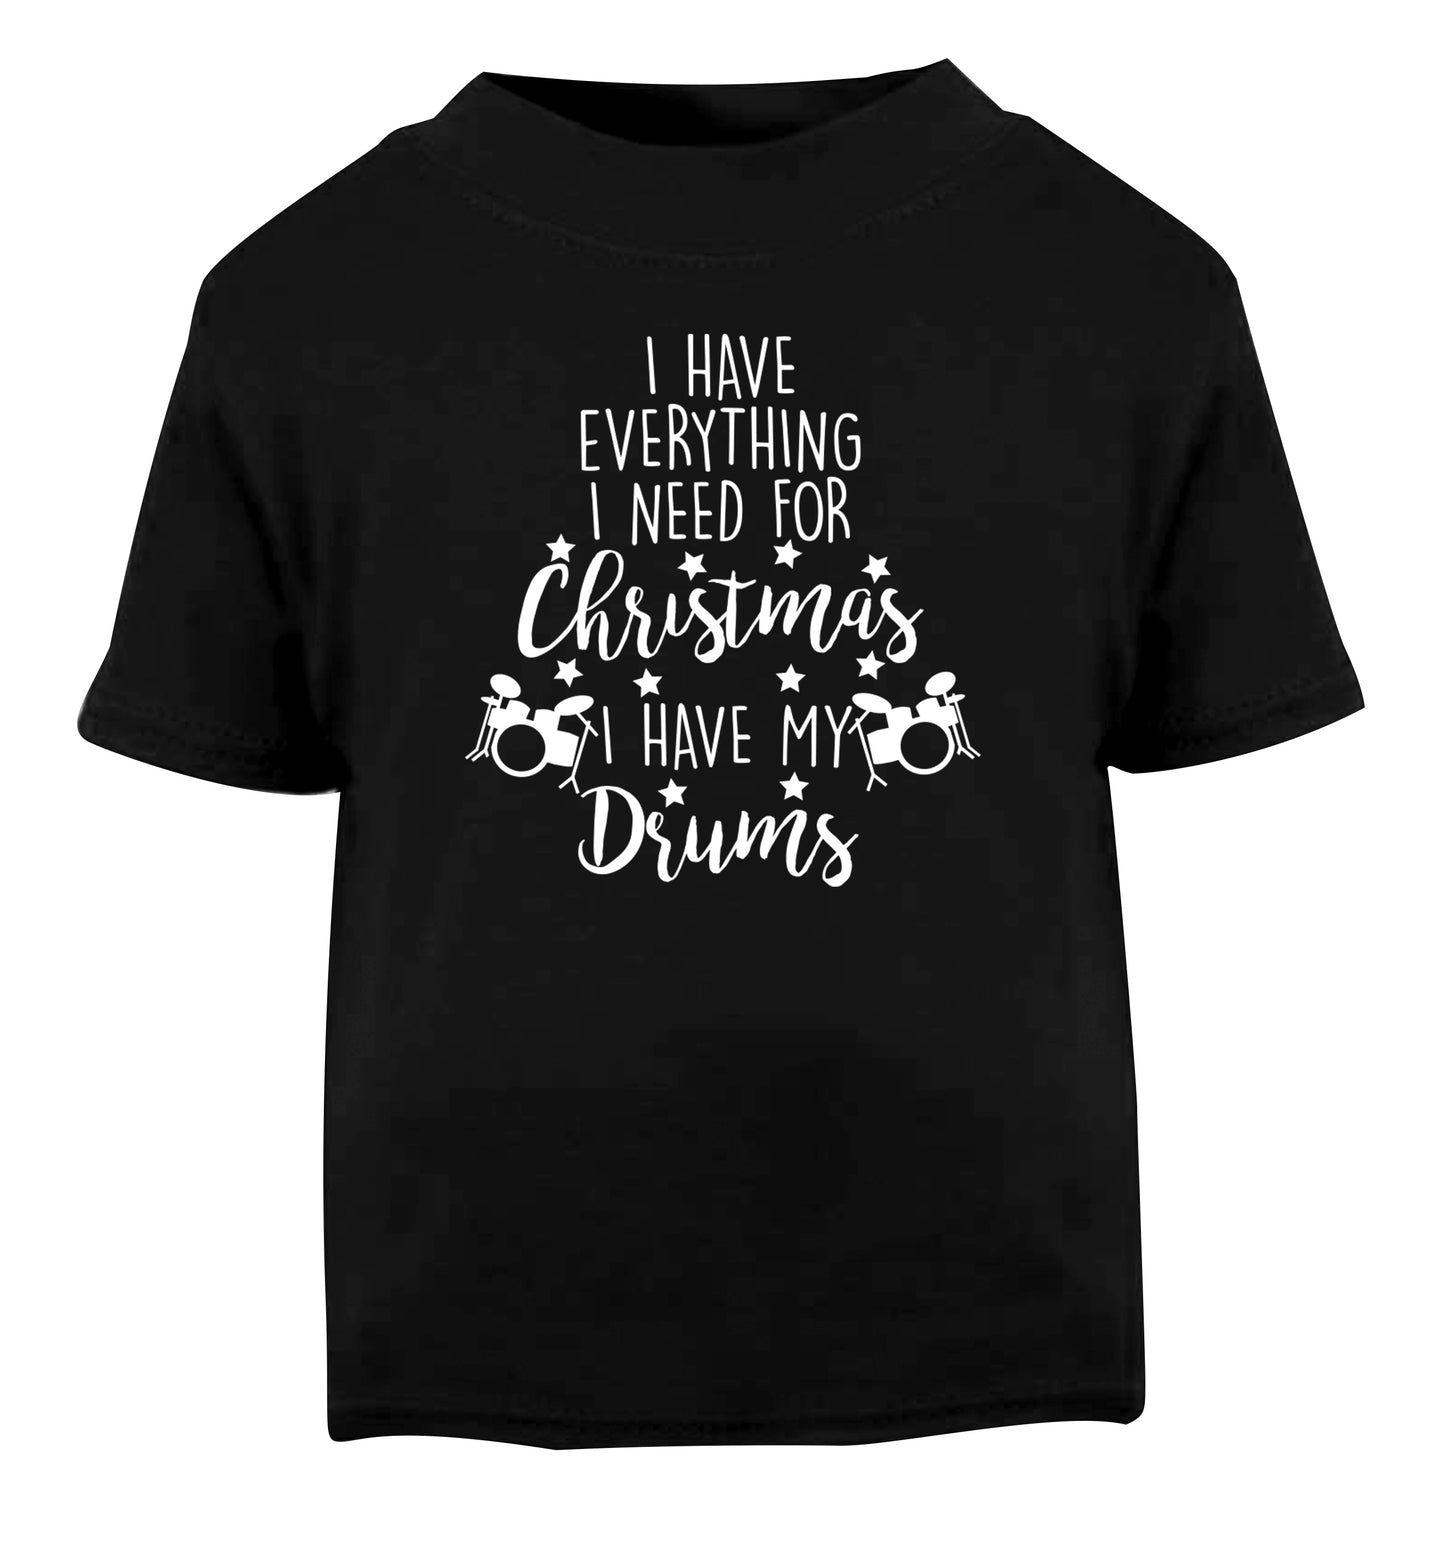 I have everything I need for Christmas I have my drums! Black Baby Toddler Tshirt 2 years